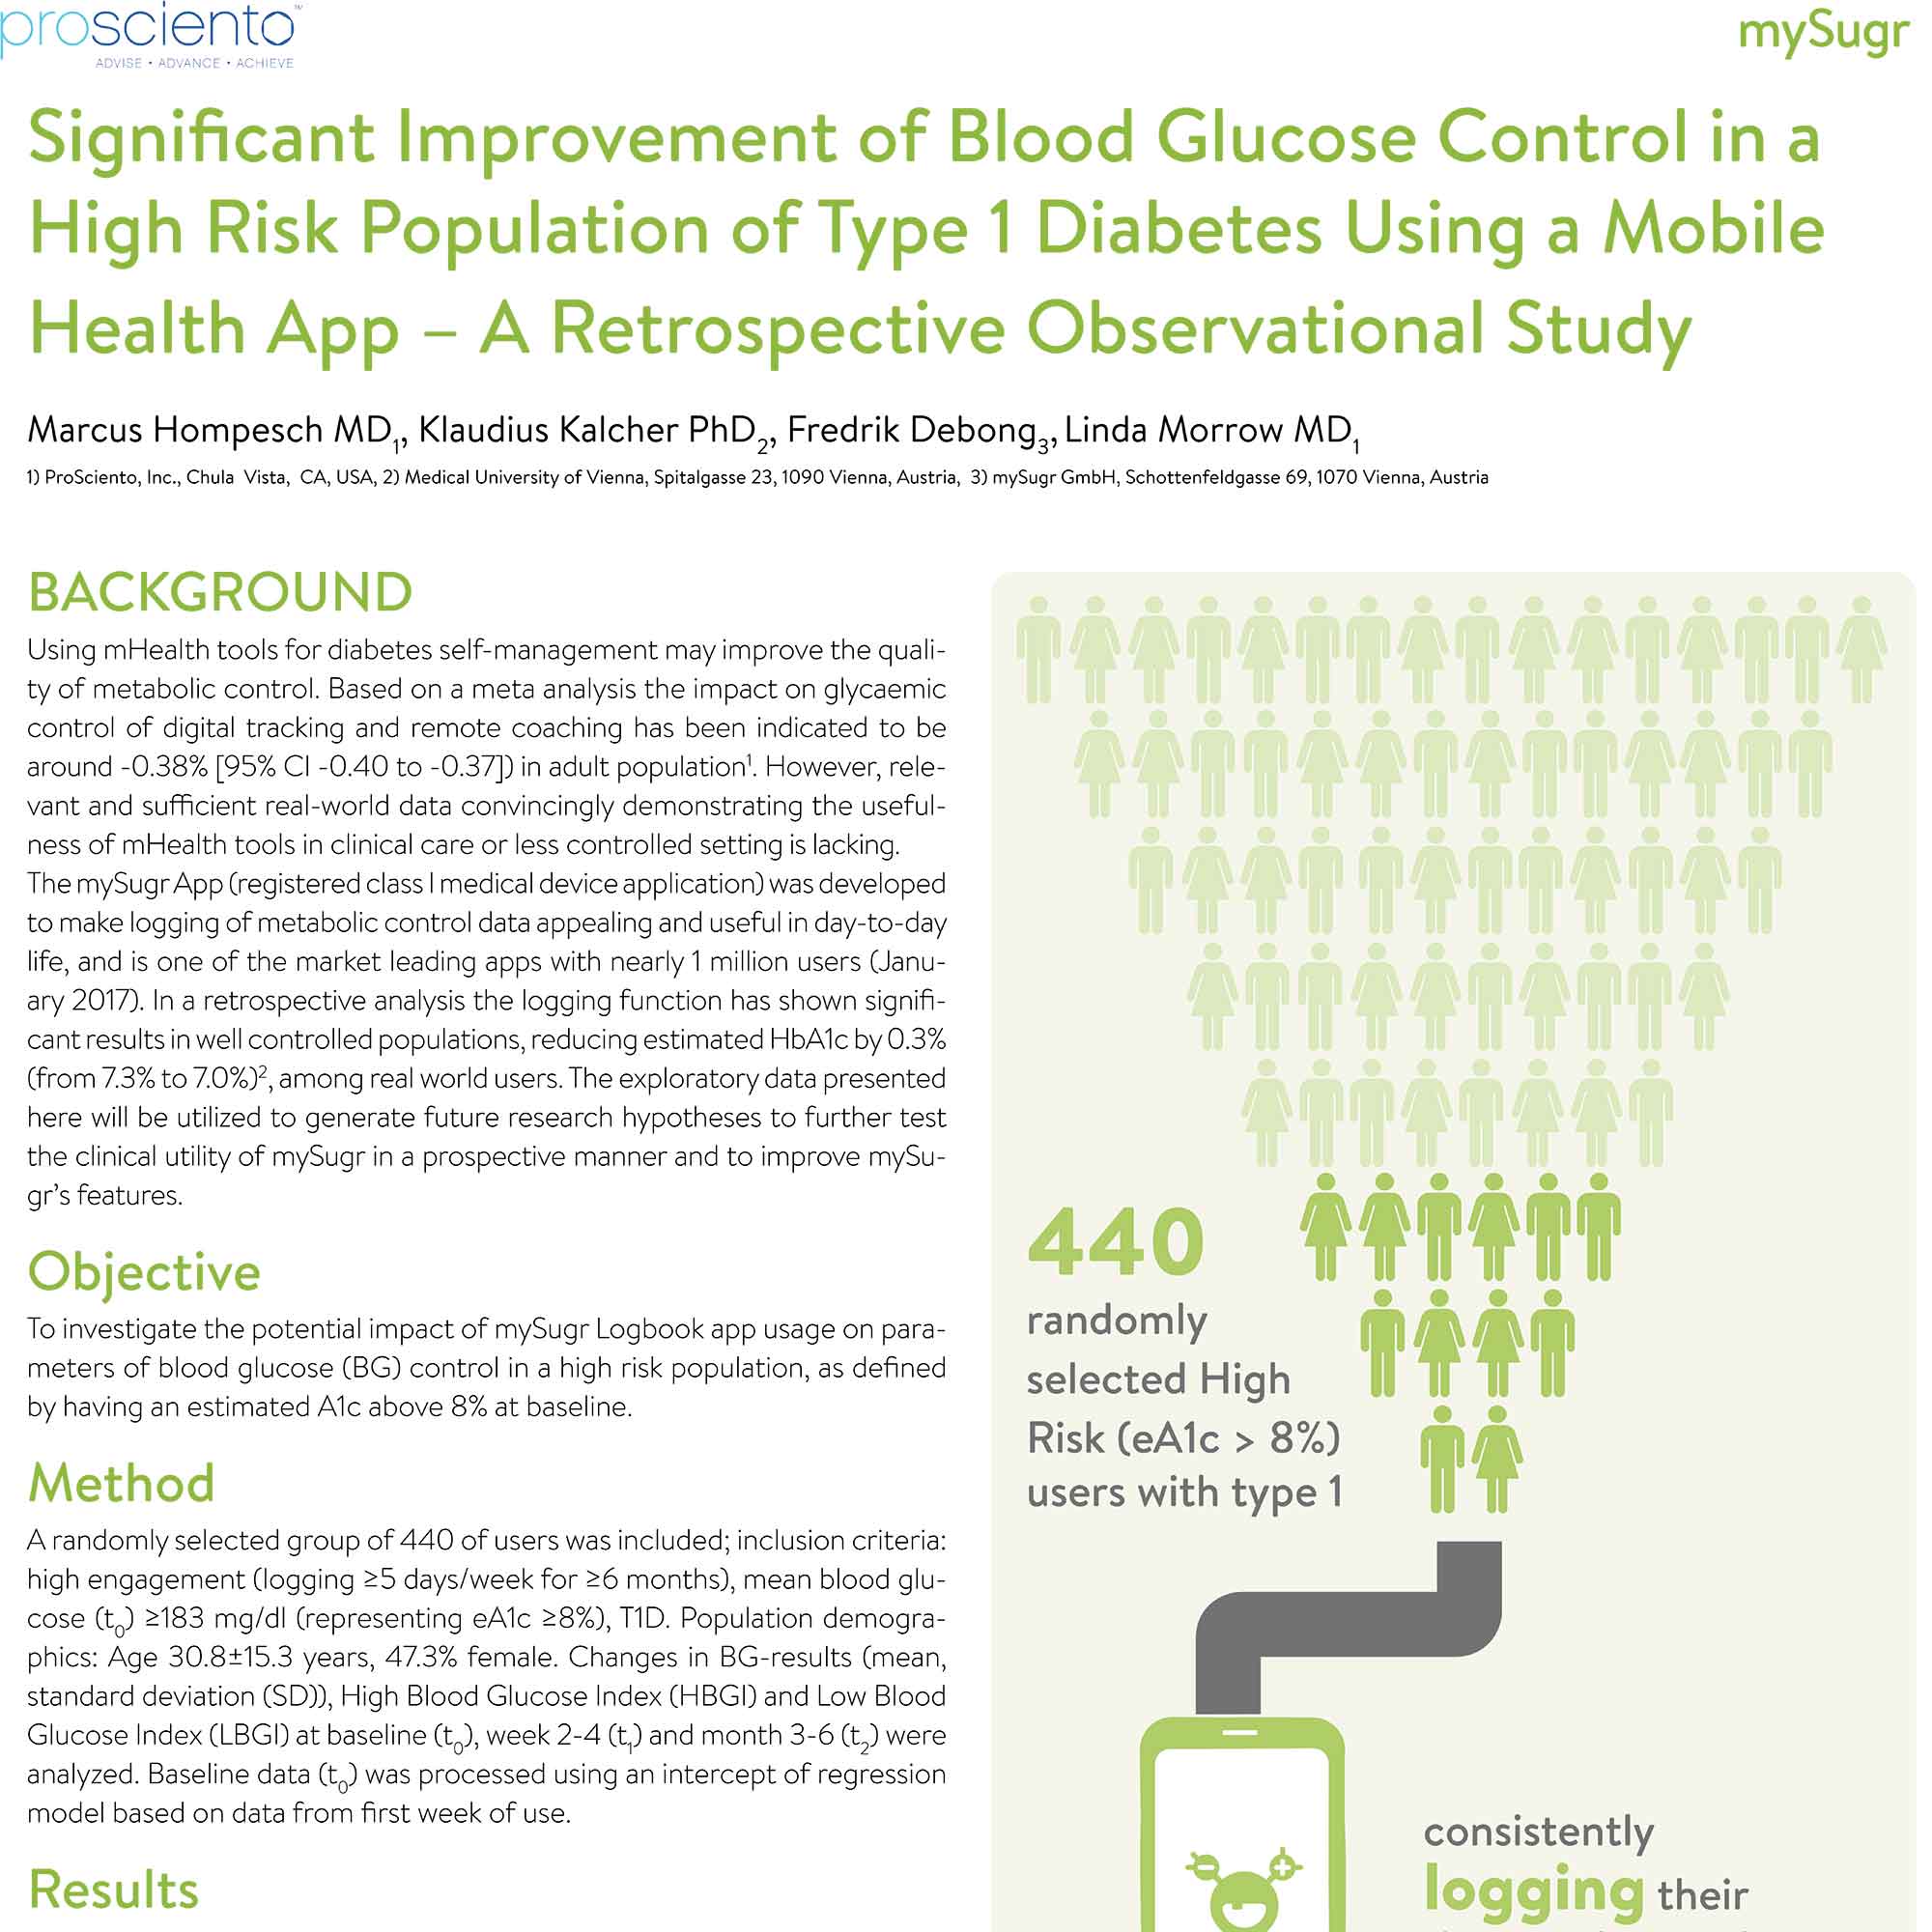 Significant Improvement of Blood Glucose Control in a High Risk Population of Type 1 Diabetes Using a Mobile Health App – A Retrospective Observational Study thumbnail